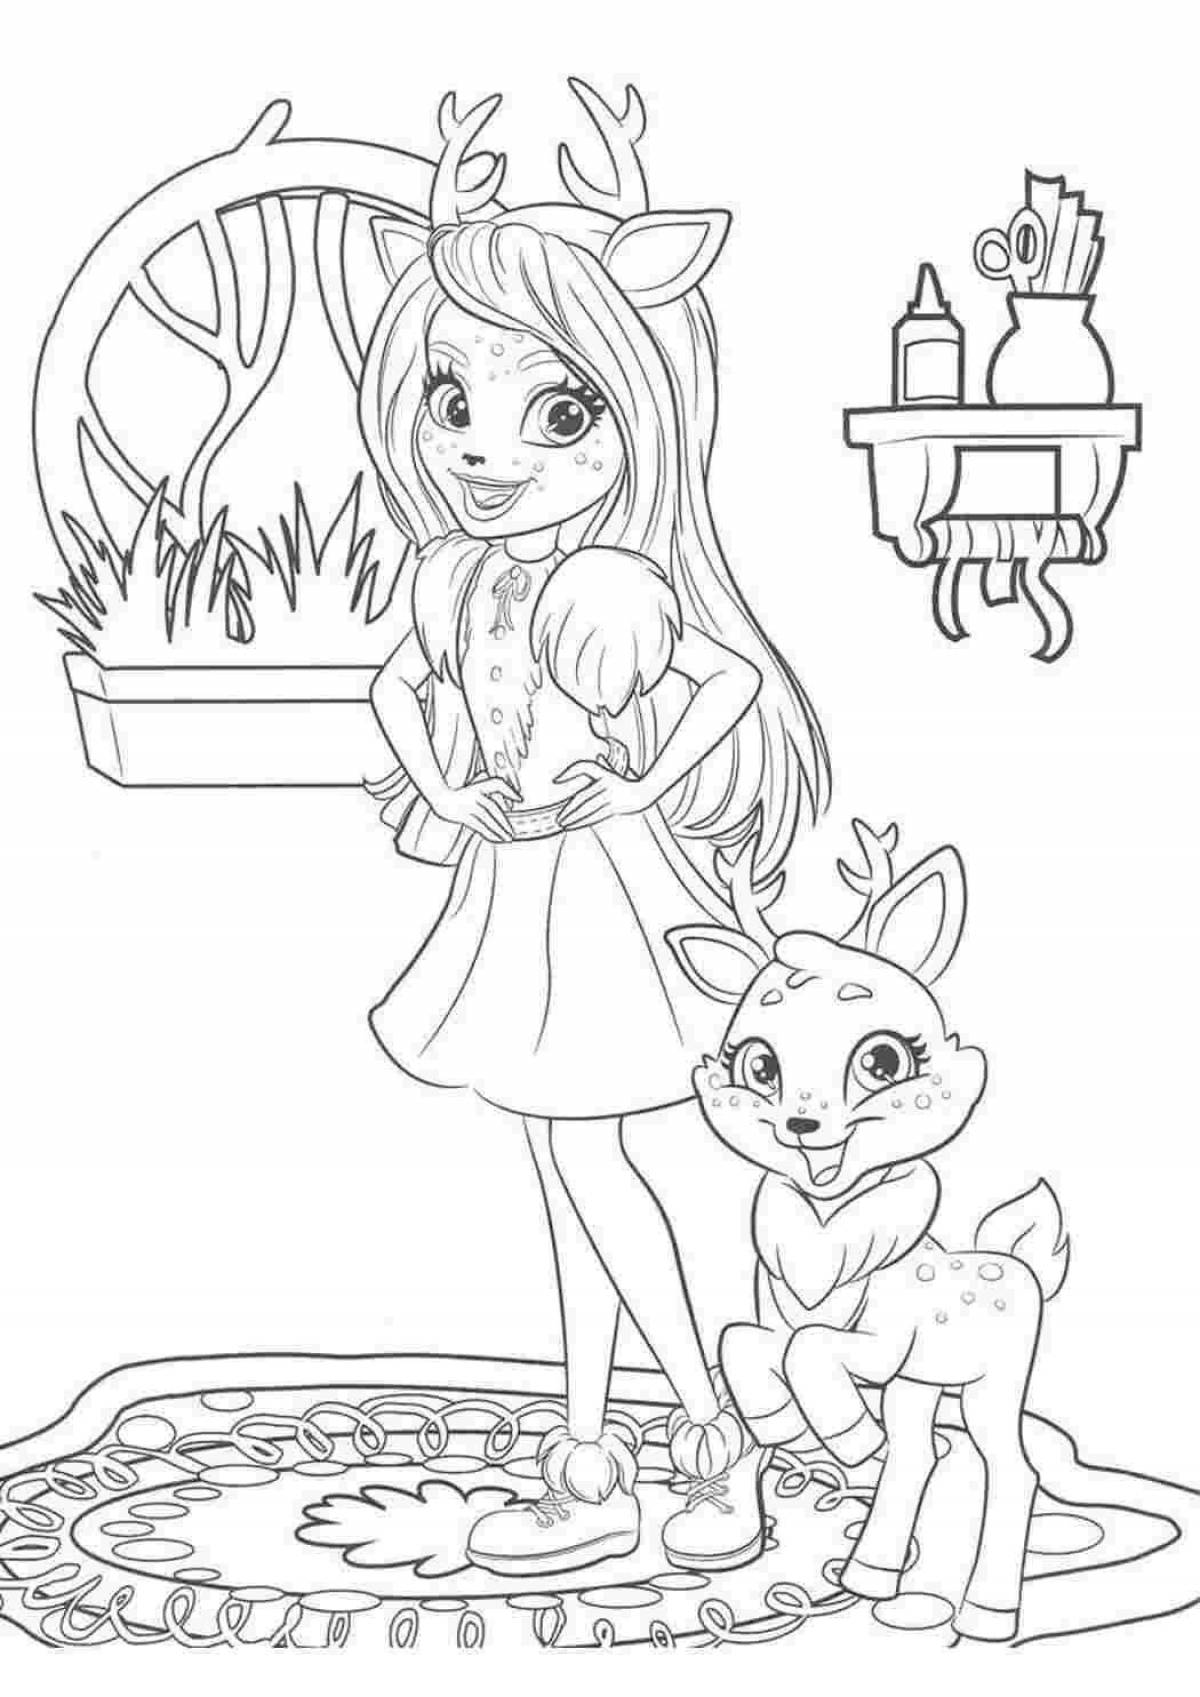 Colorful inchanchymus coloring page